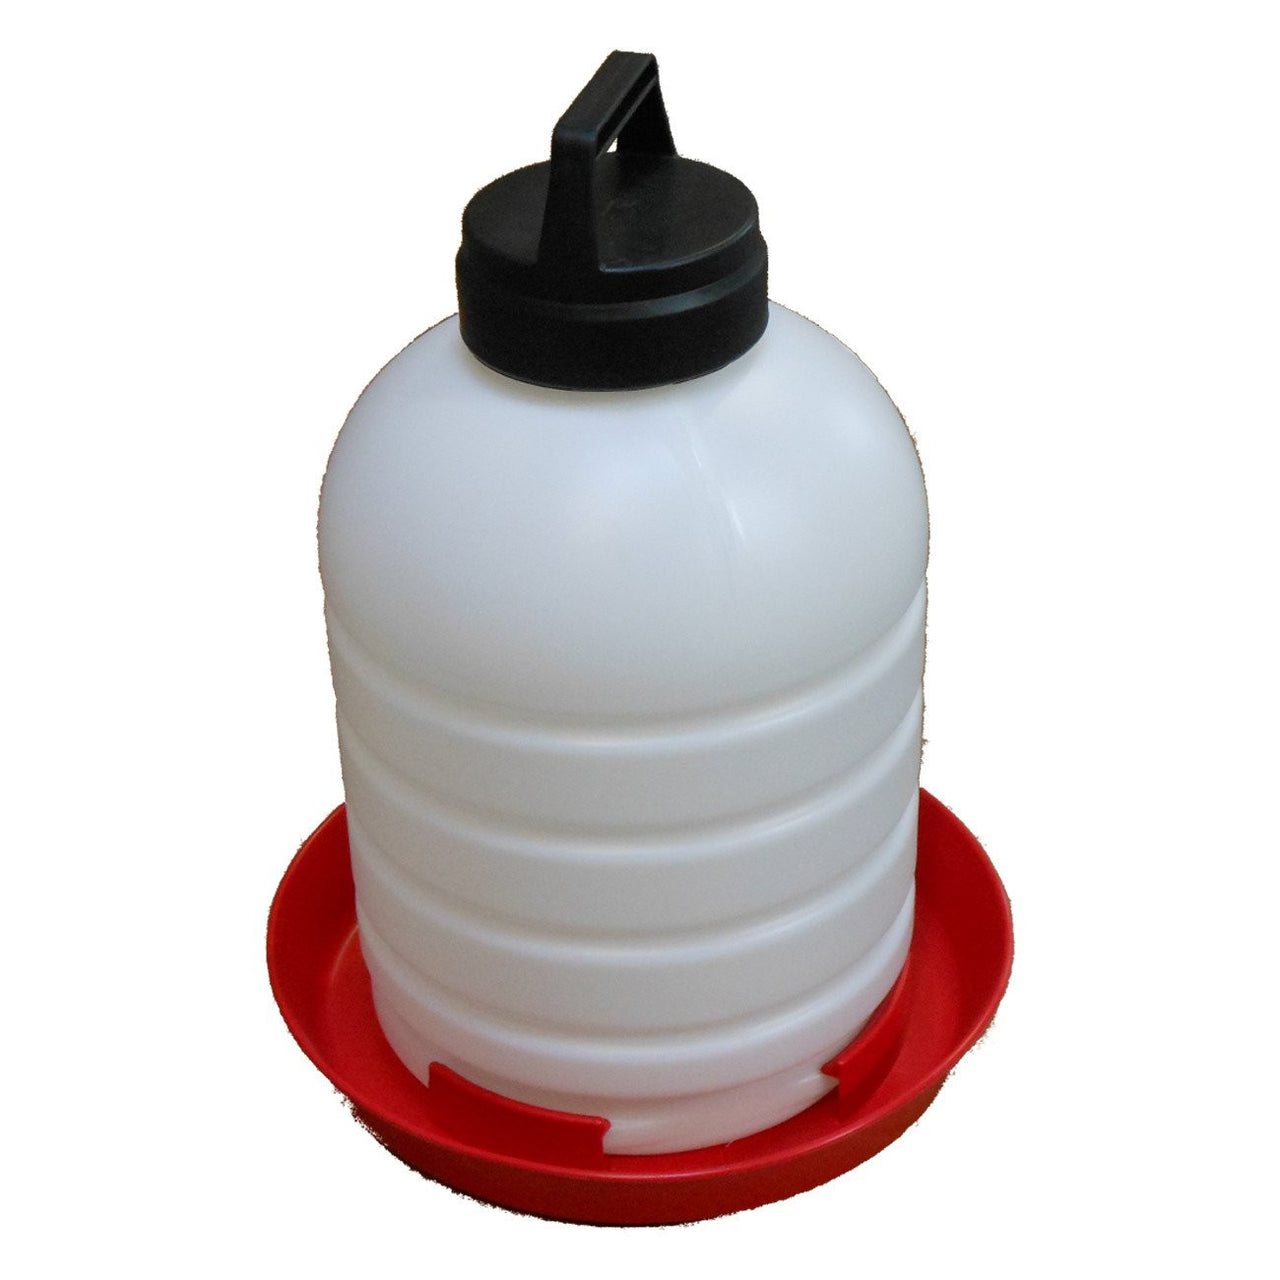 Millside Top Fill Poultry Fountain 5 Gallon (Sold In 2S) - Poultry Waterers Plastic Millside - Canada